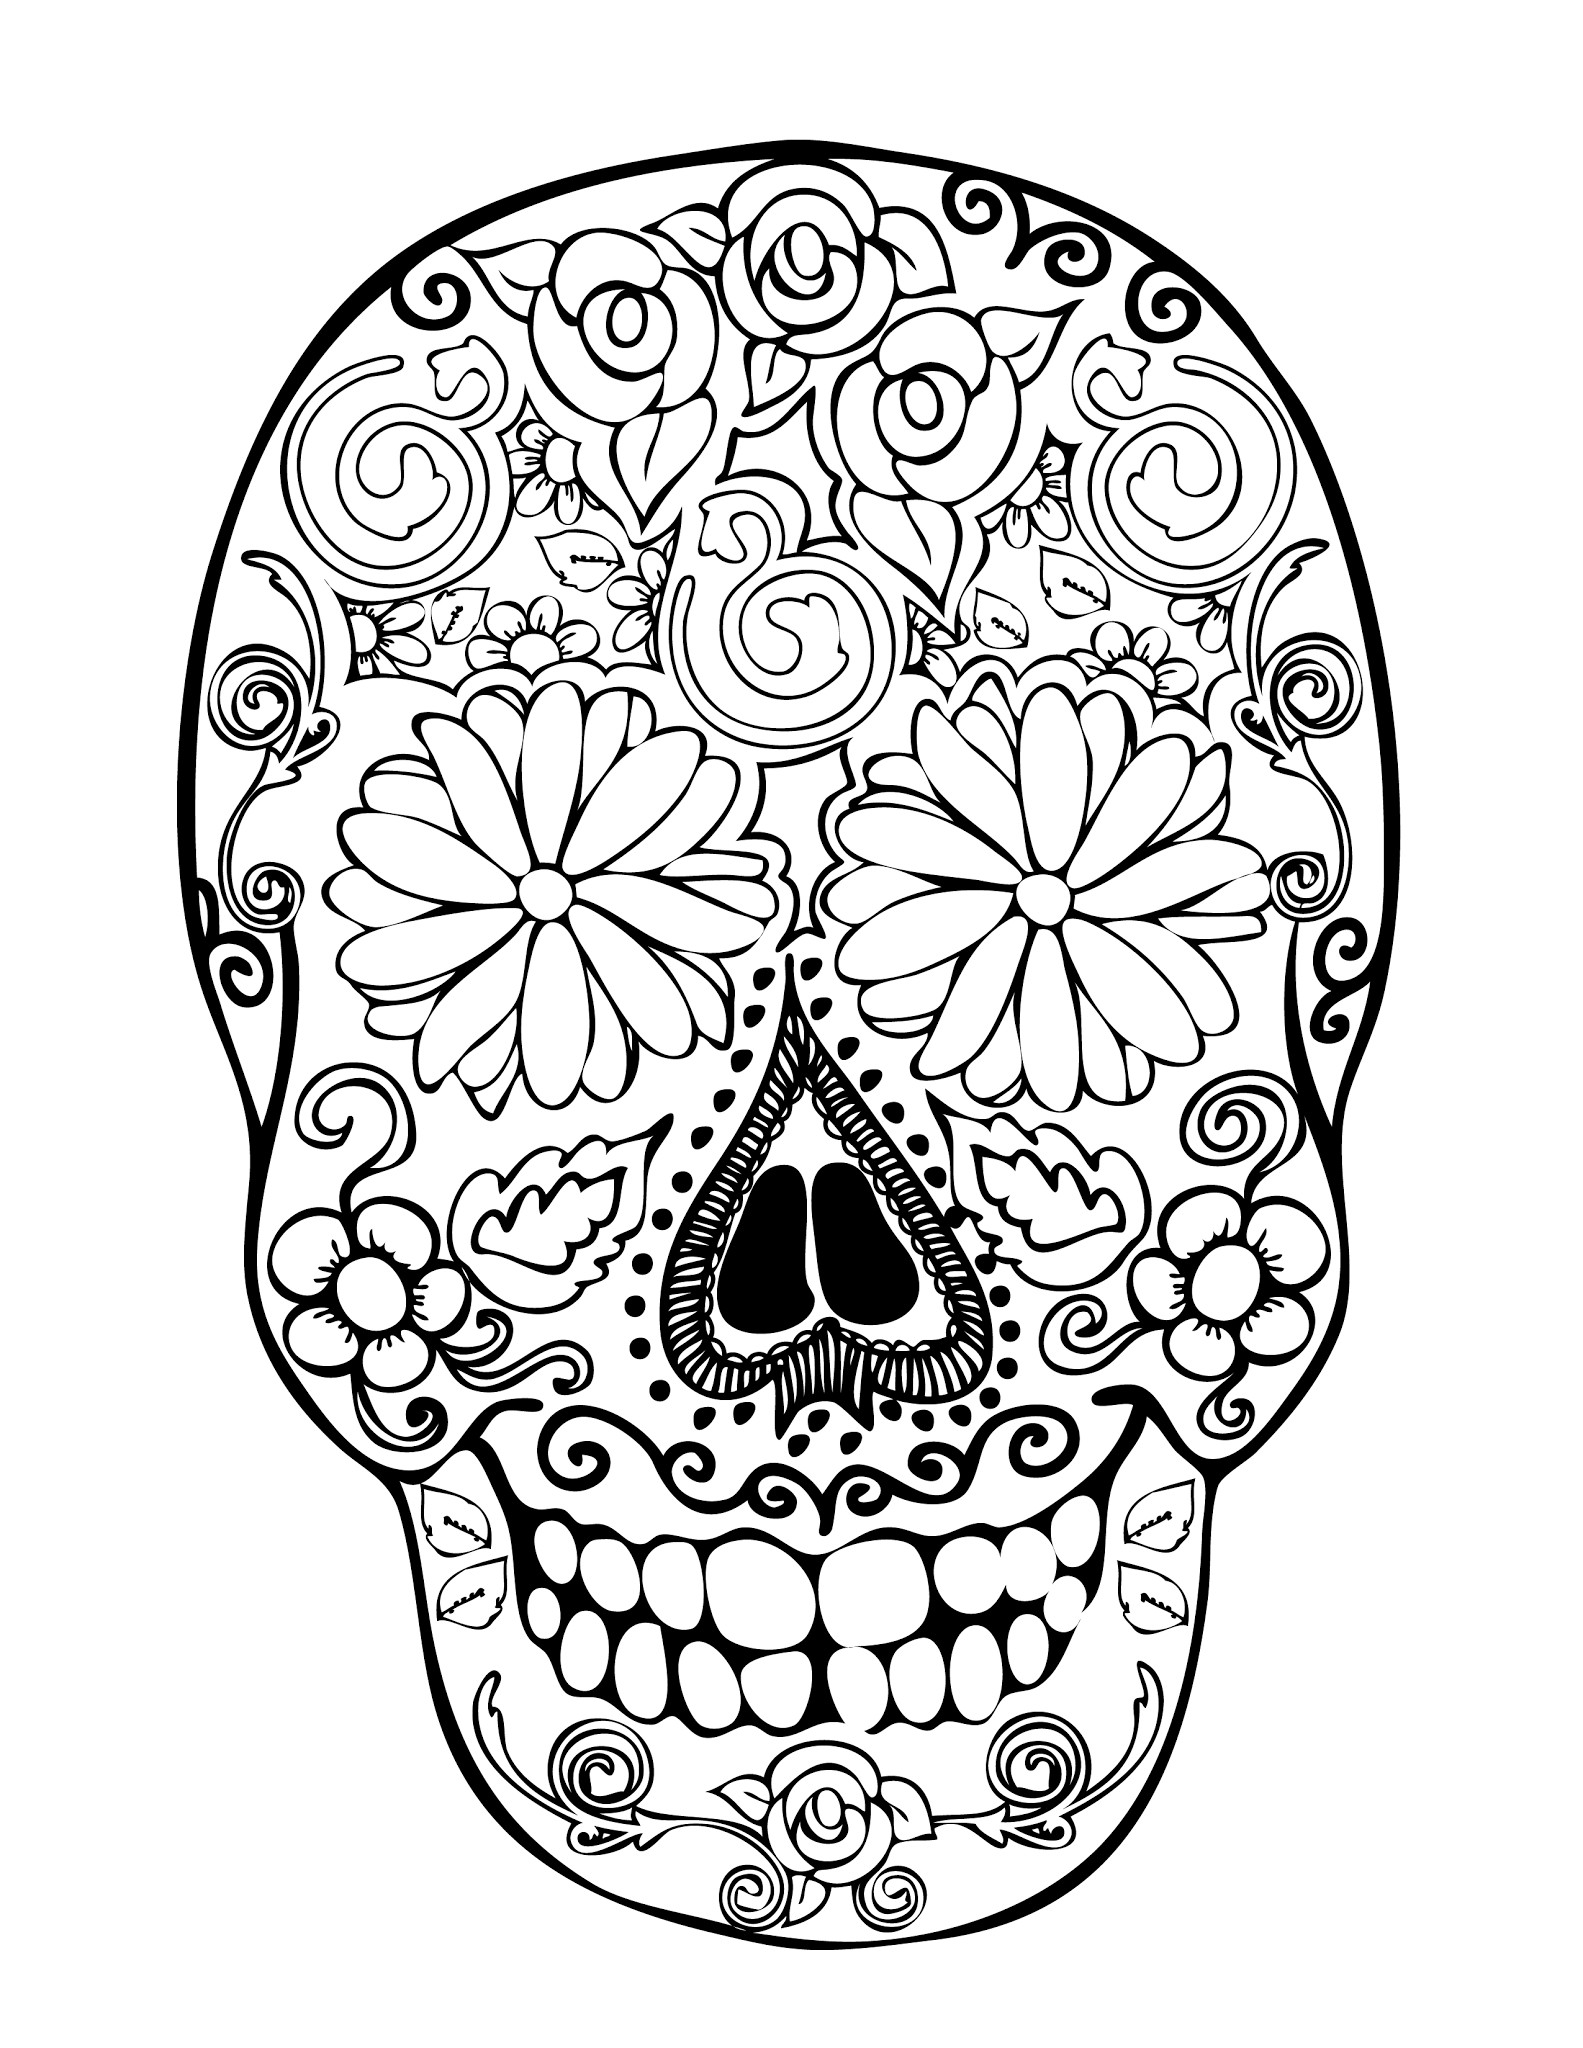 Coloring Pages Of Skulls
 28 skull coloring pages for kids Print Color Craft